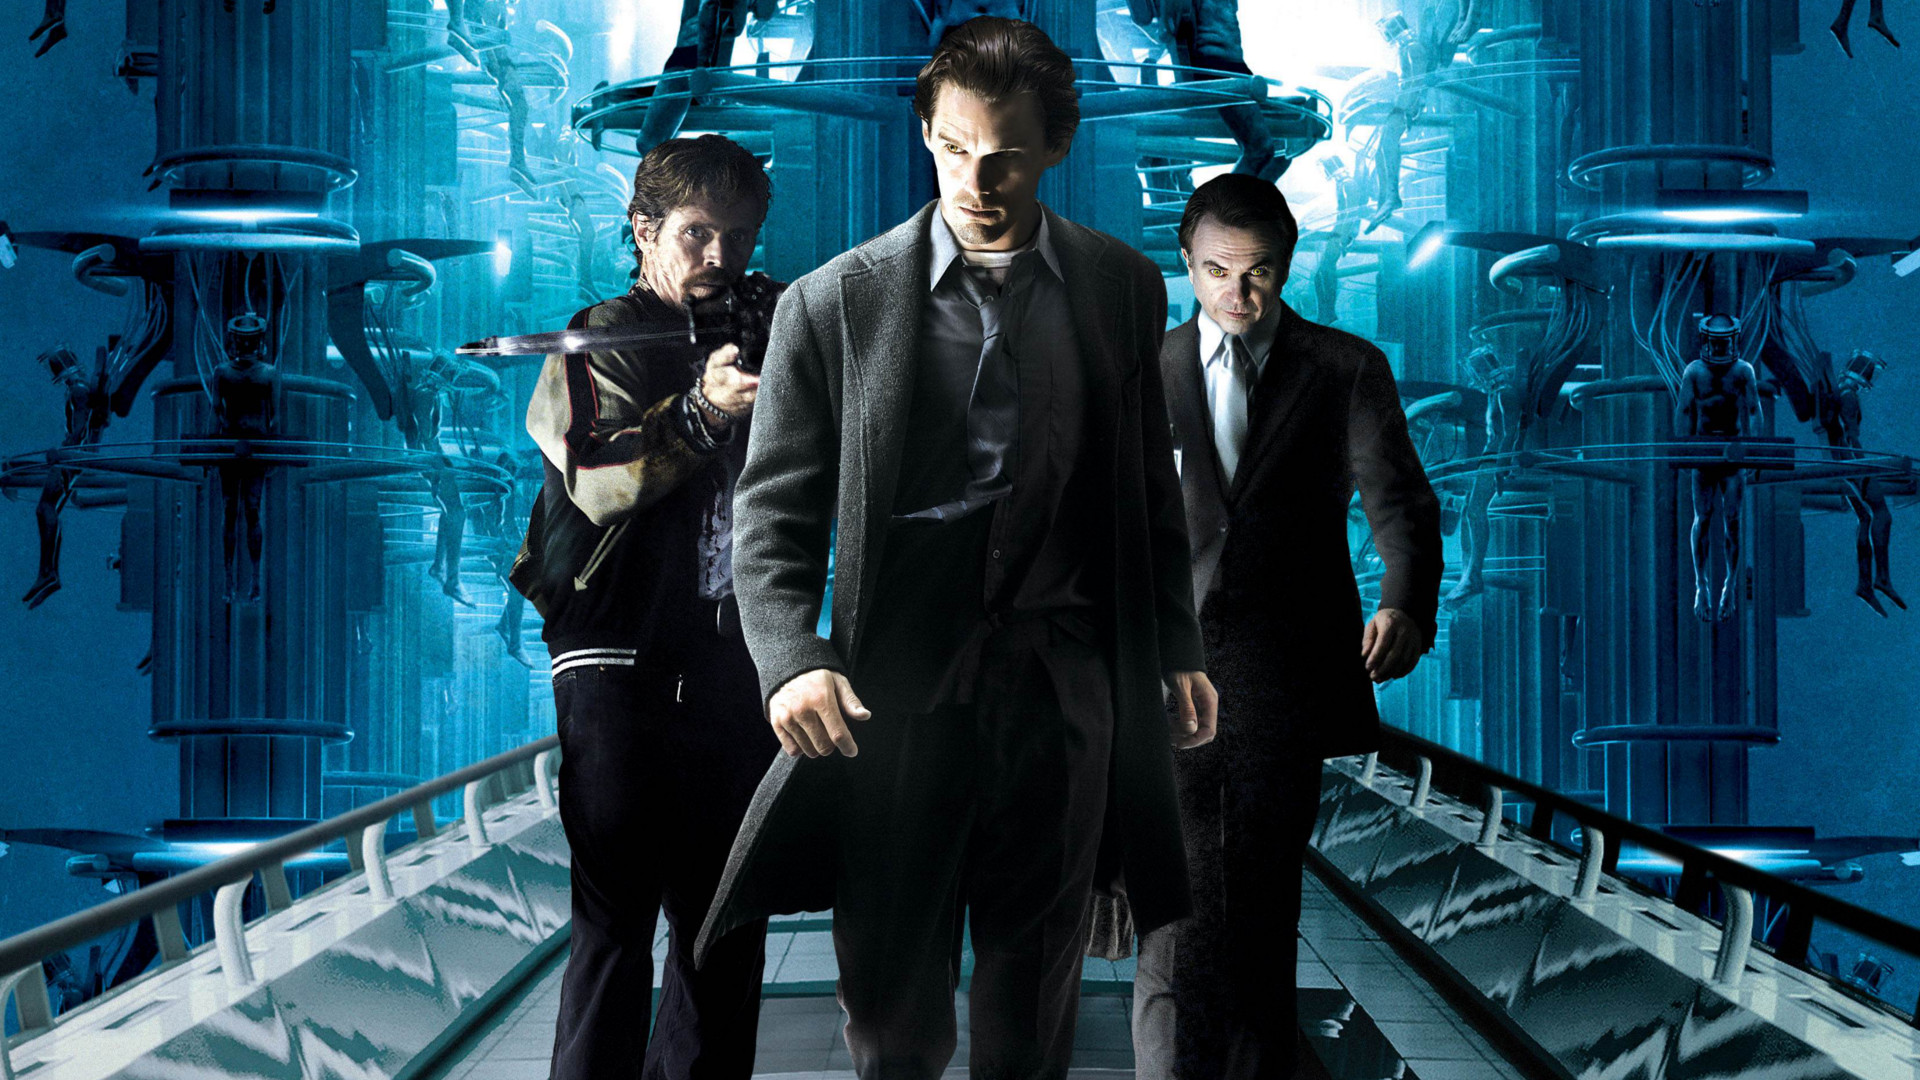 The Daybreakers